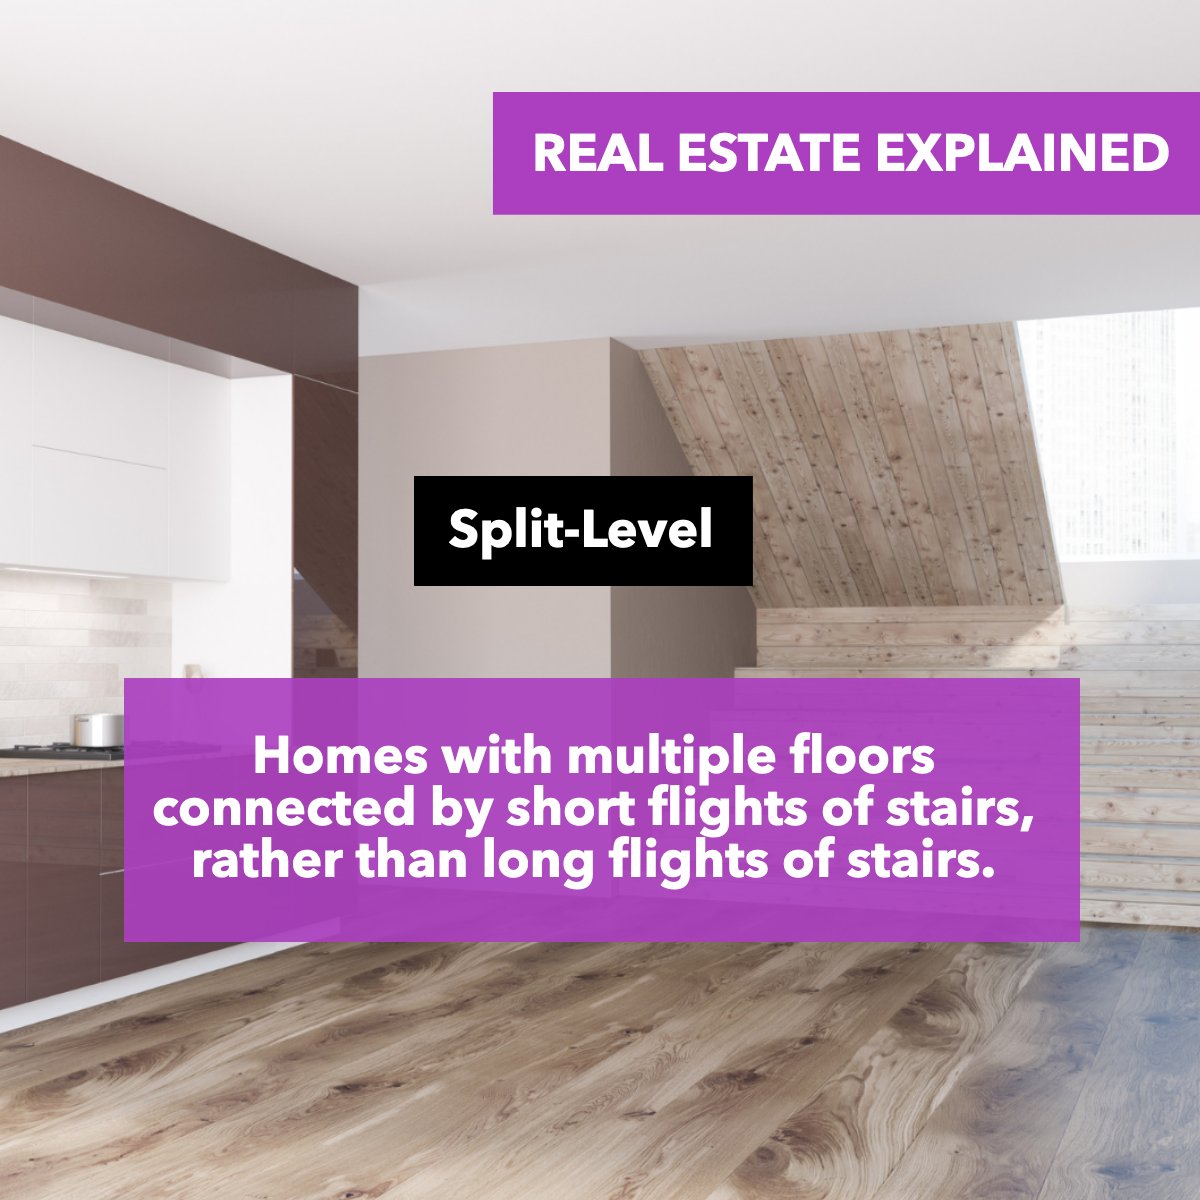 Did you know what a Spit-Level is? 🤔 Is this the type of house that you like? #splitlevelremodel #splitlevelhome #splitleveldesign #RacingRealEstateAgent #BarrettRealEstate #StoneTreeRealEstateTeam #maricopaazrealestate #racingagent #arizonarealestate